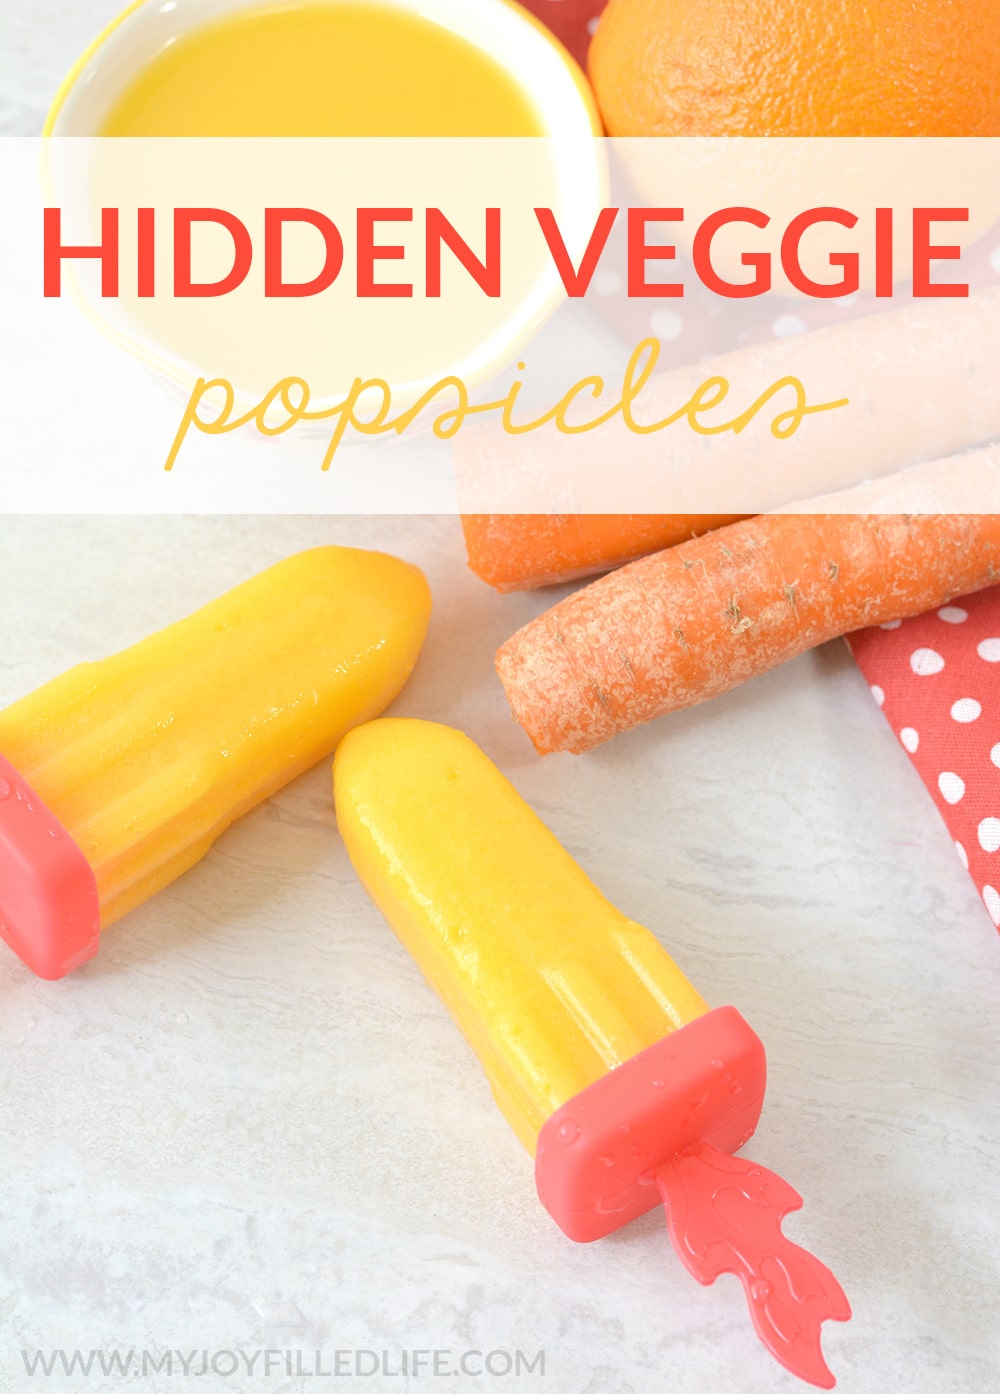 This popsicle recipe is the perfect summer treat for picky eaters! Your kids will love cooling down with these hidden veggie popsicles this summer! #popsicles #frozentreat #hiddenveggies #veggiepopsicles #homemadepopsicles